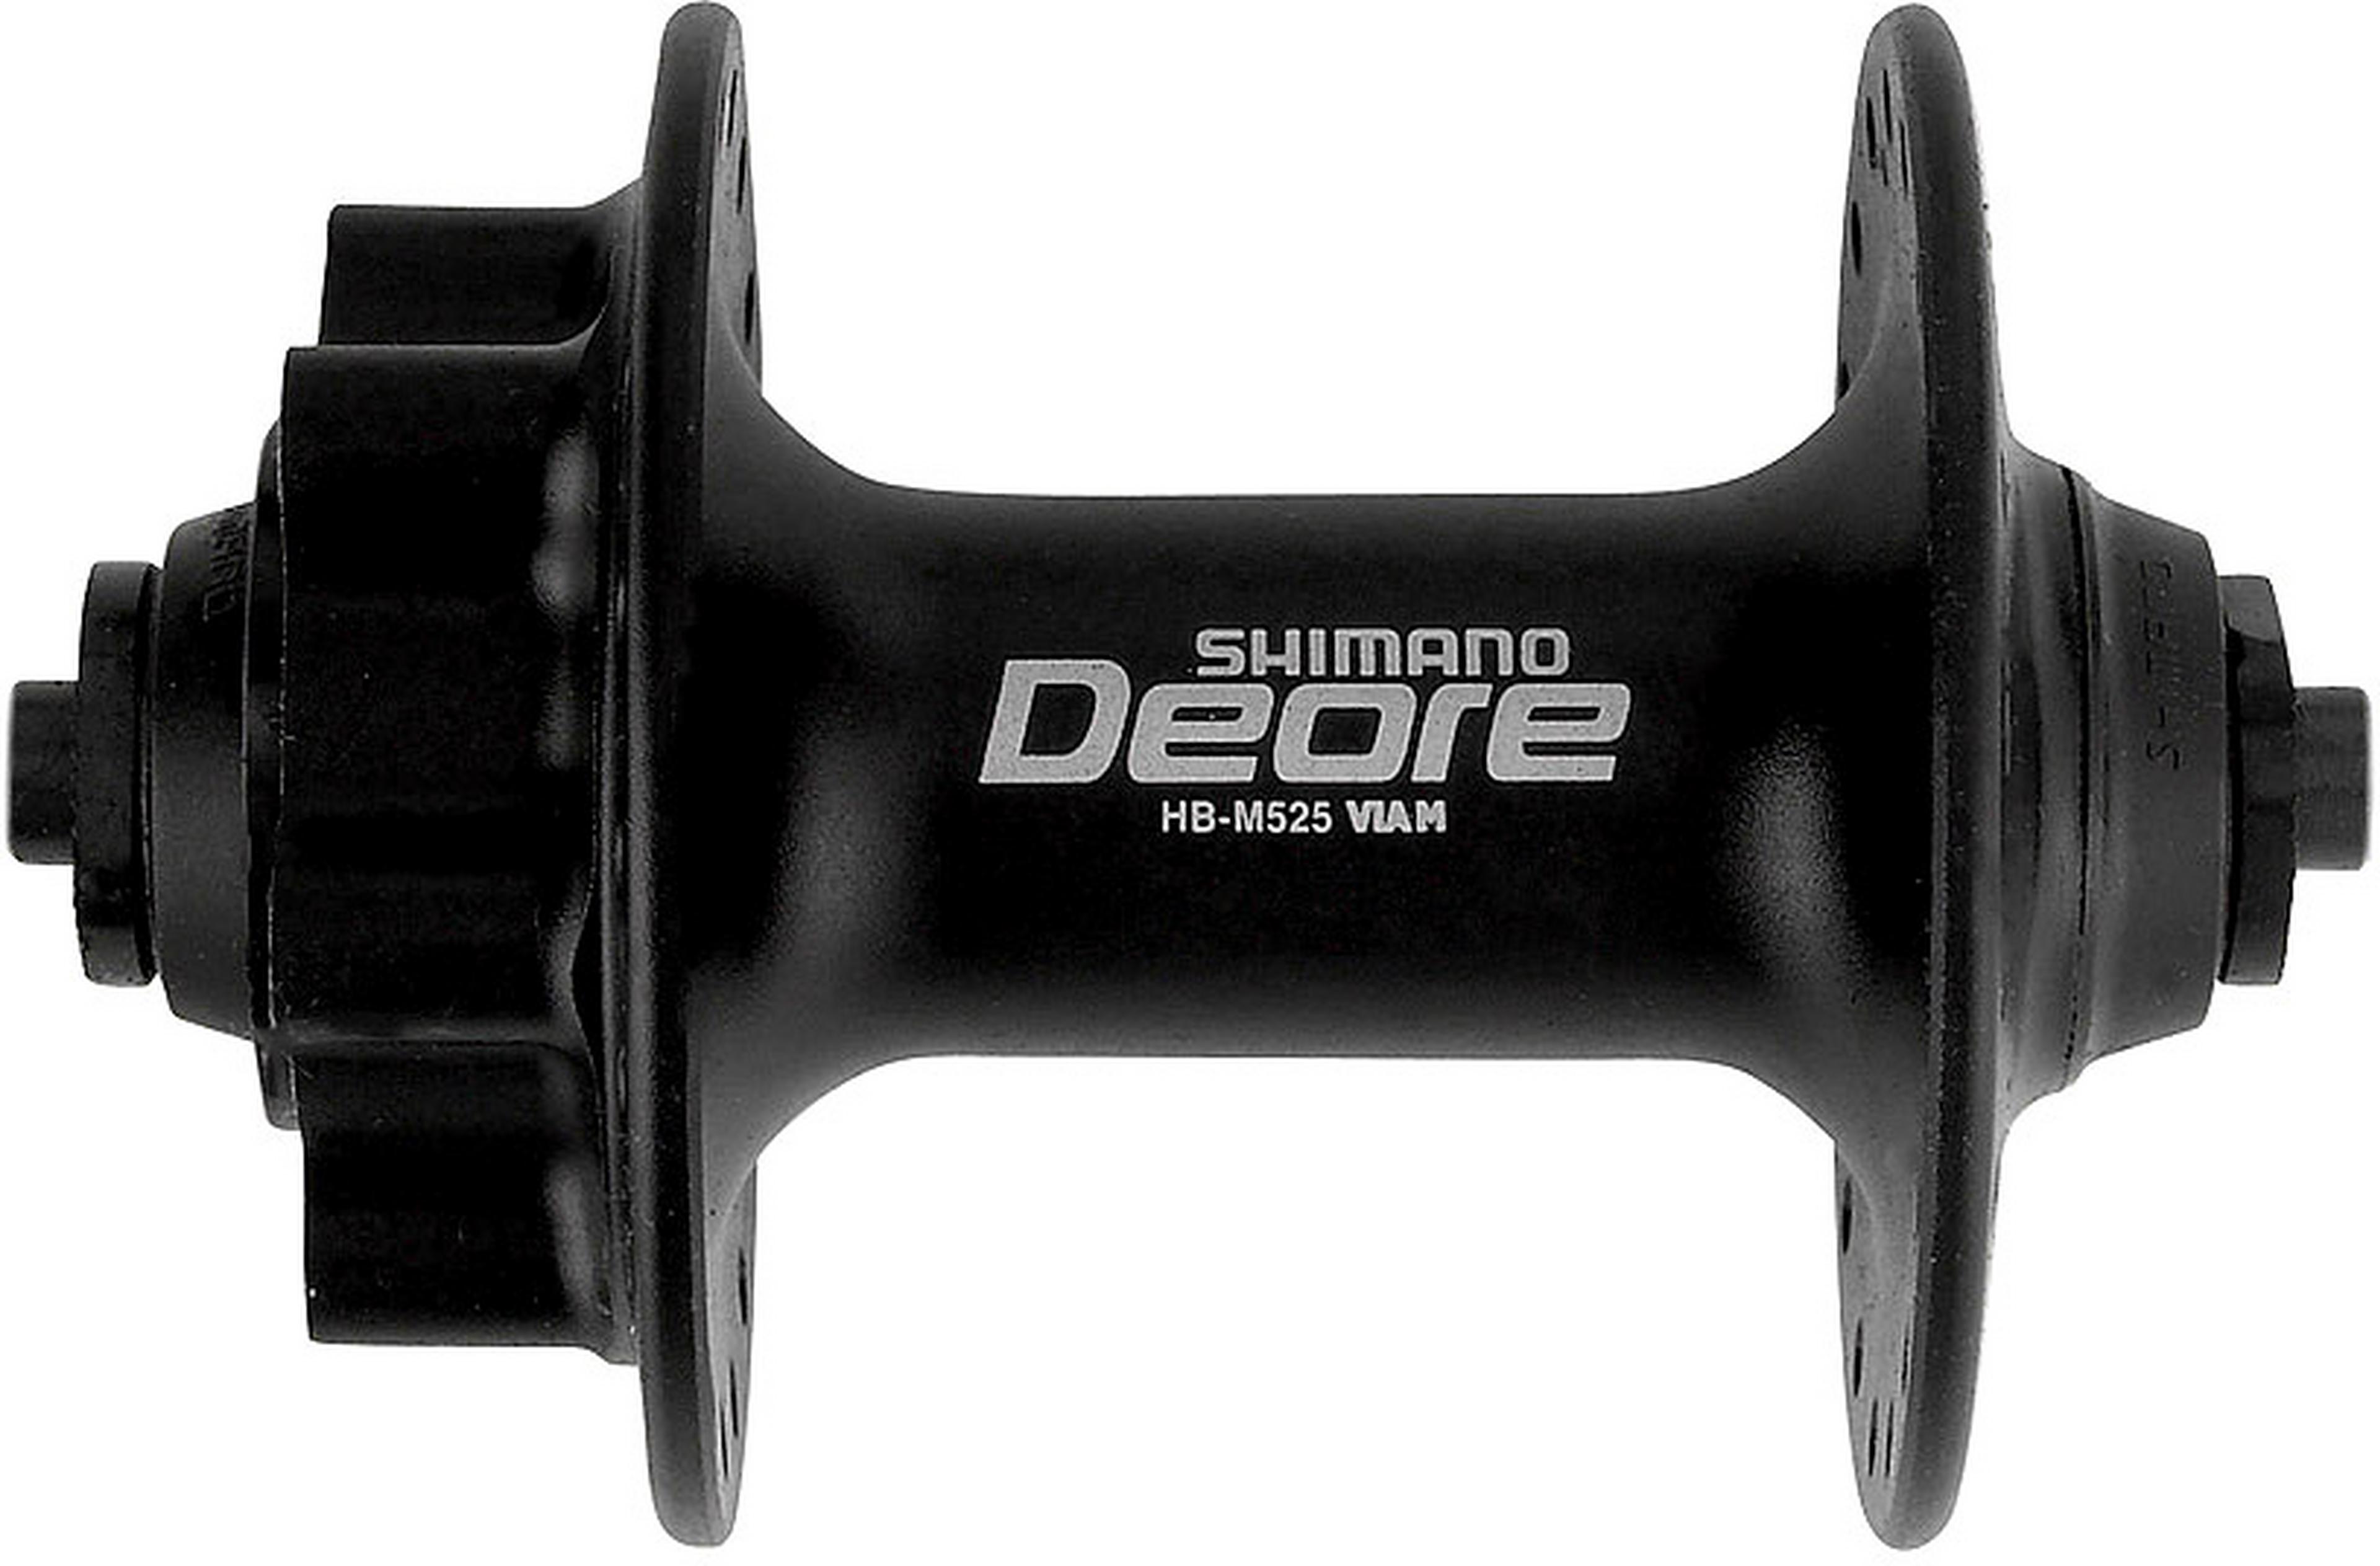 Shimano Deore Disc Hub Front M525